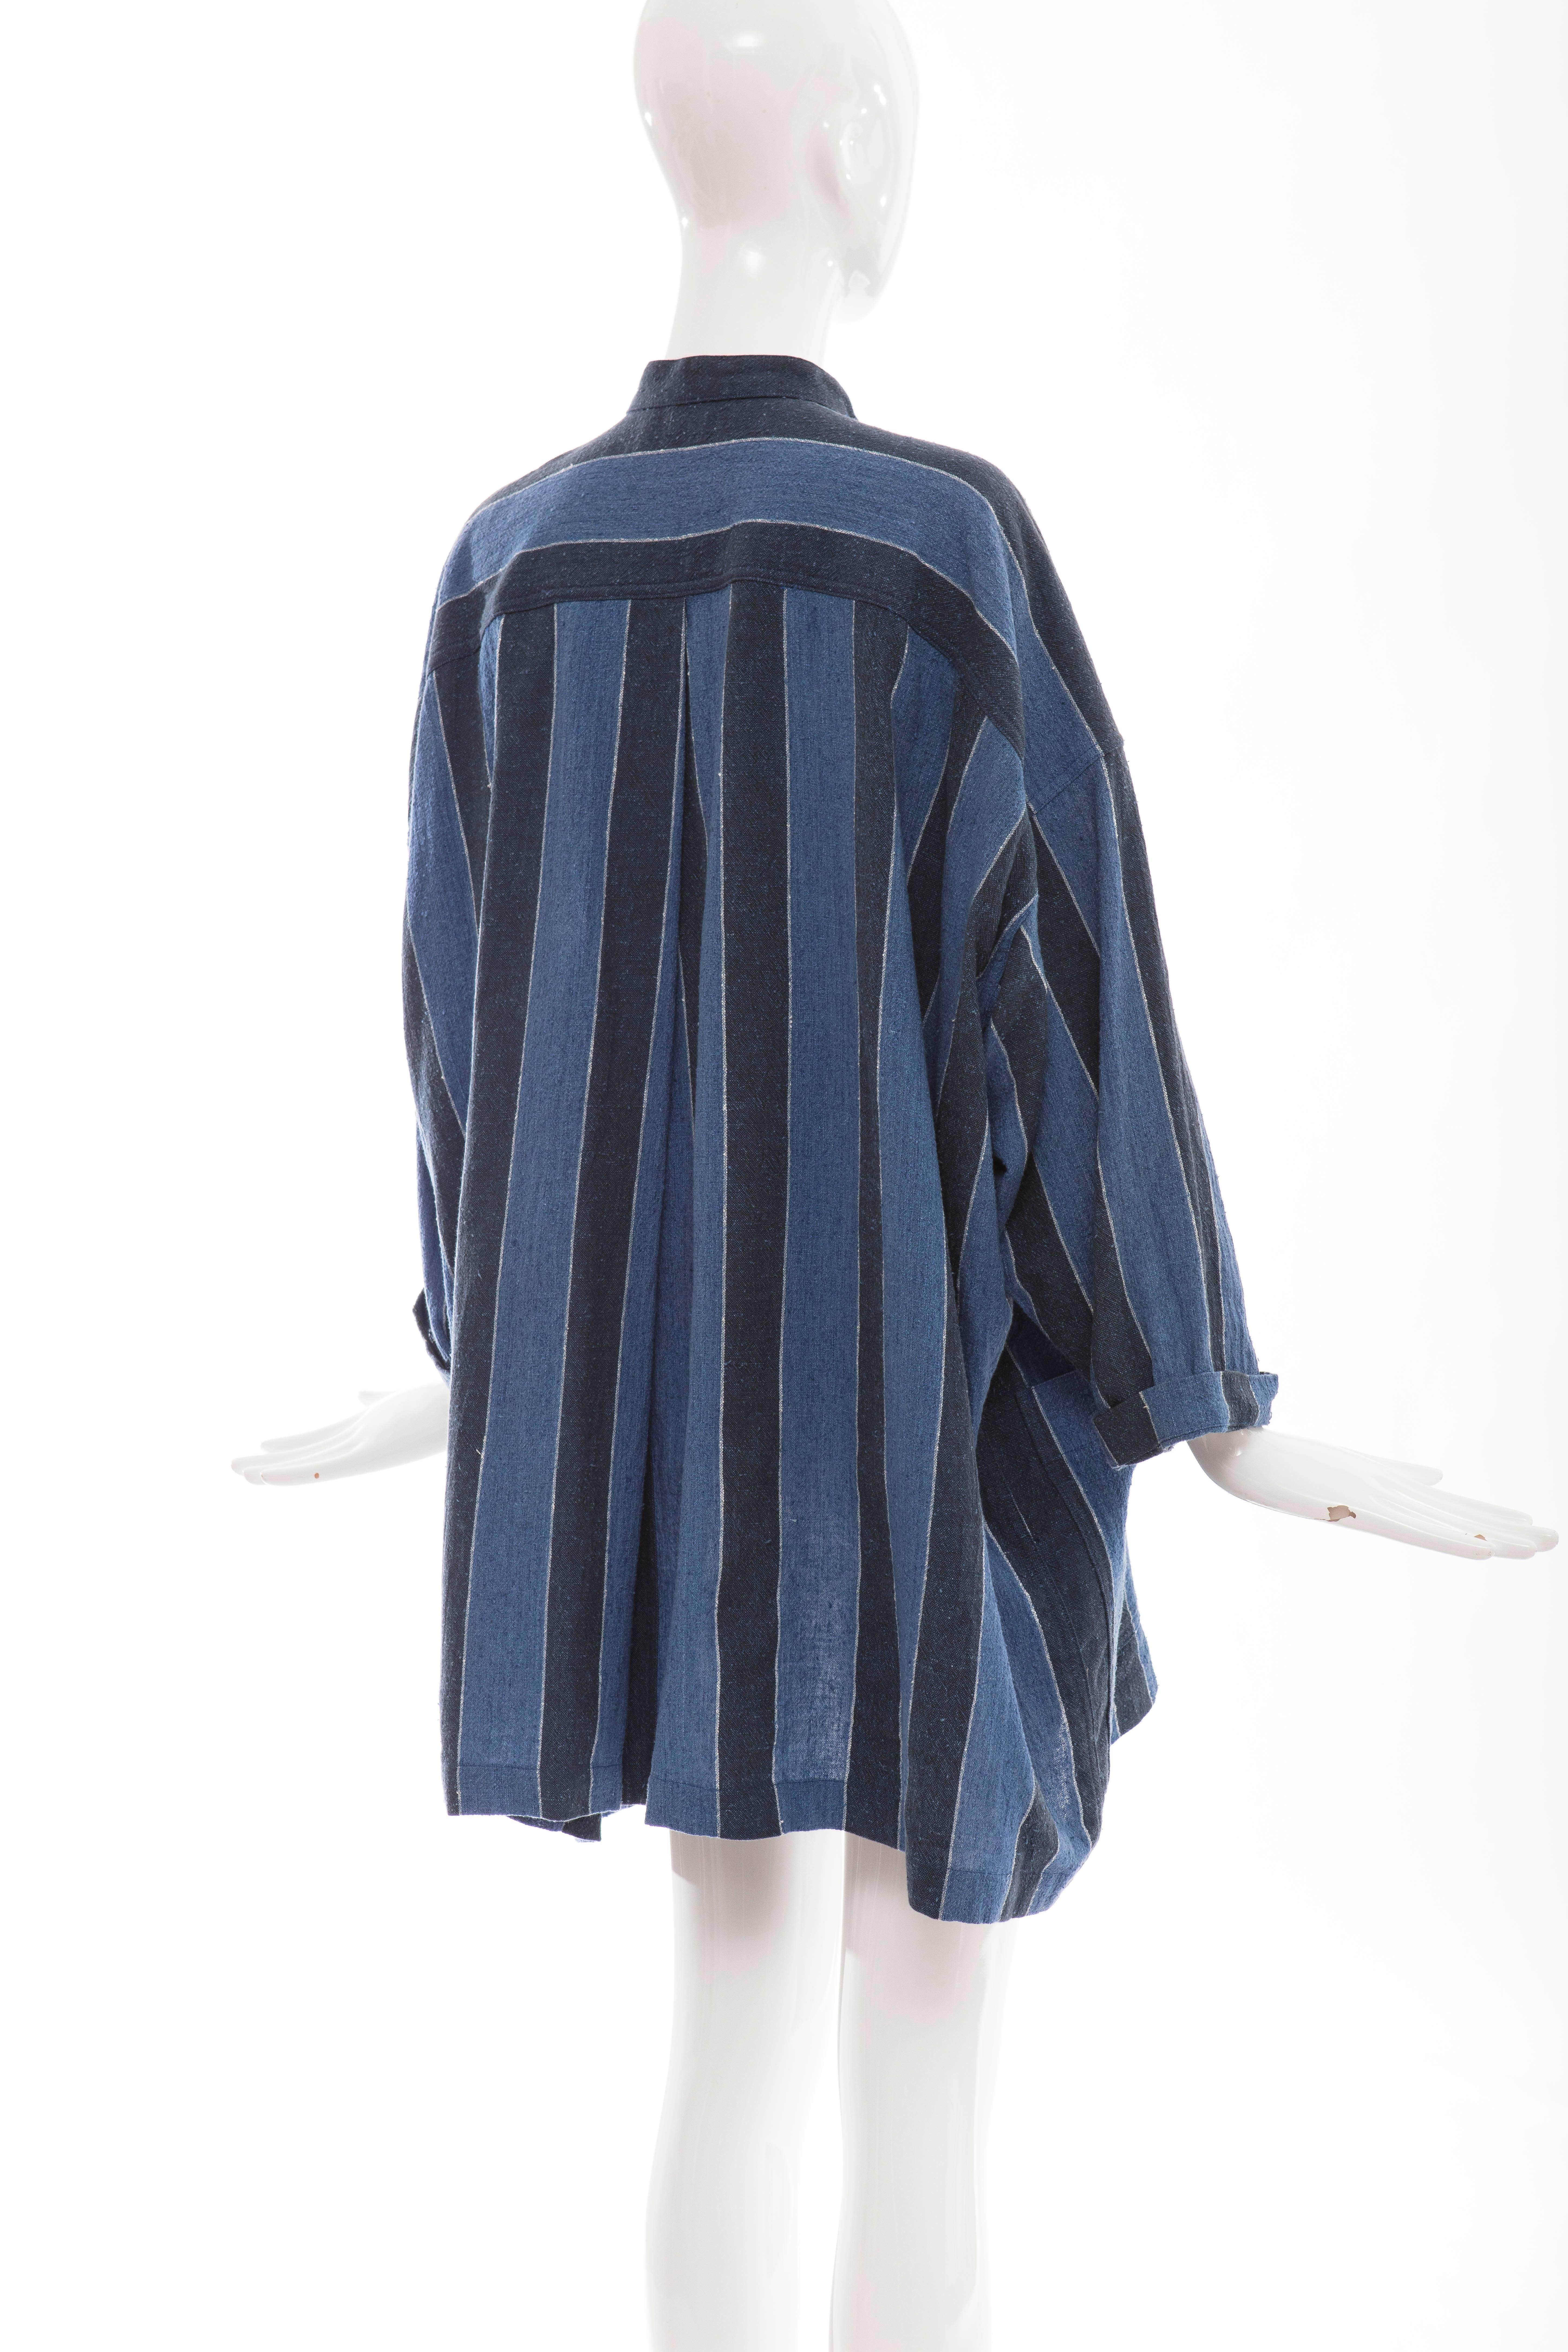 Issey Miyake Plantation Woven Cotton Button Front Shirt, Circa: 1980's For Sale 1